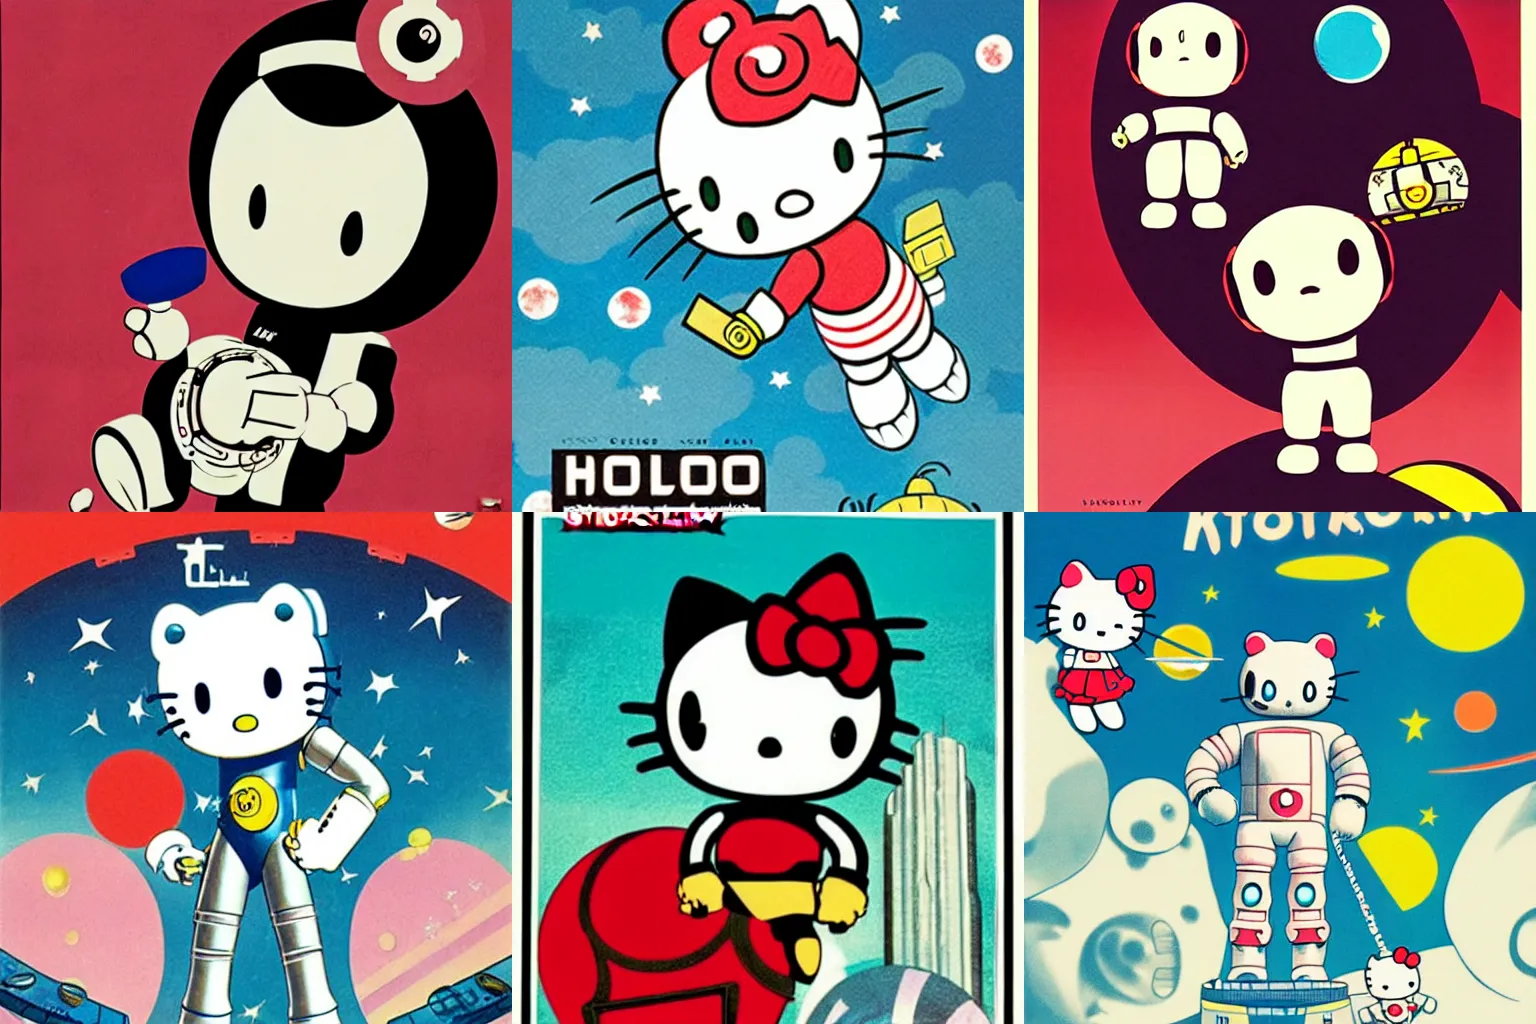 Prompt: criterion collection Poster art for the film Robo Hello Kitty Astro boy goes to Space